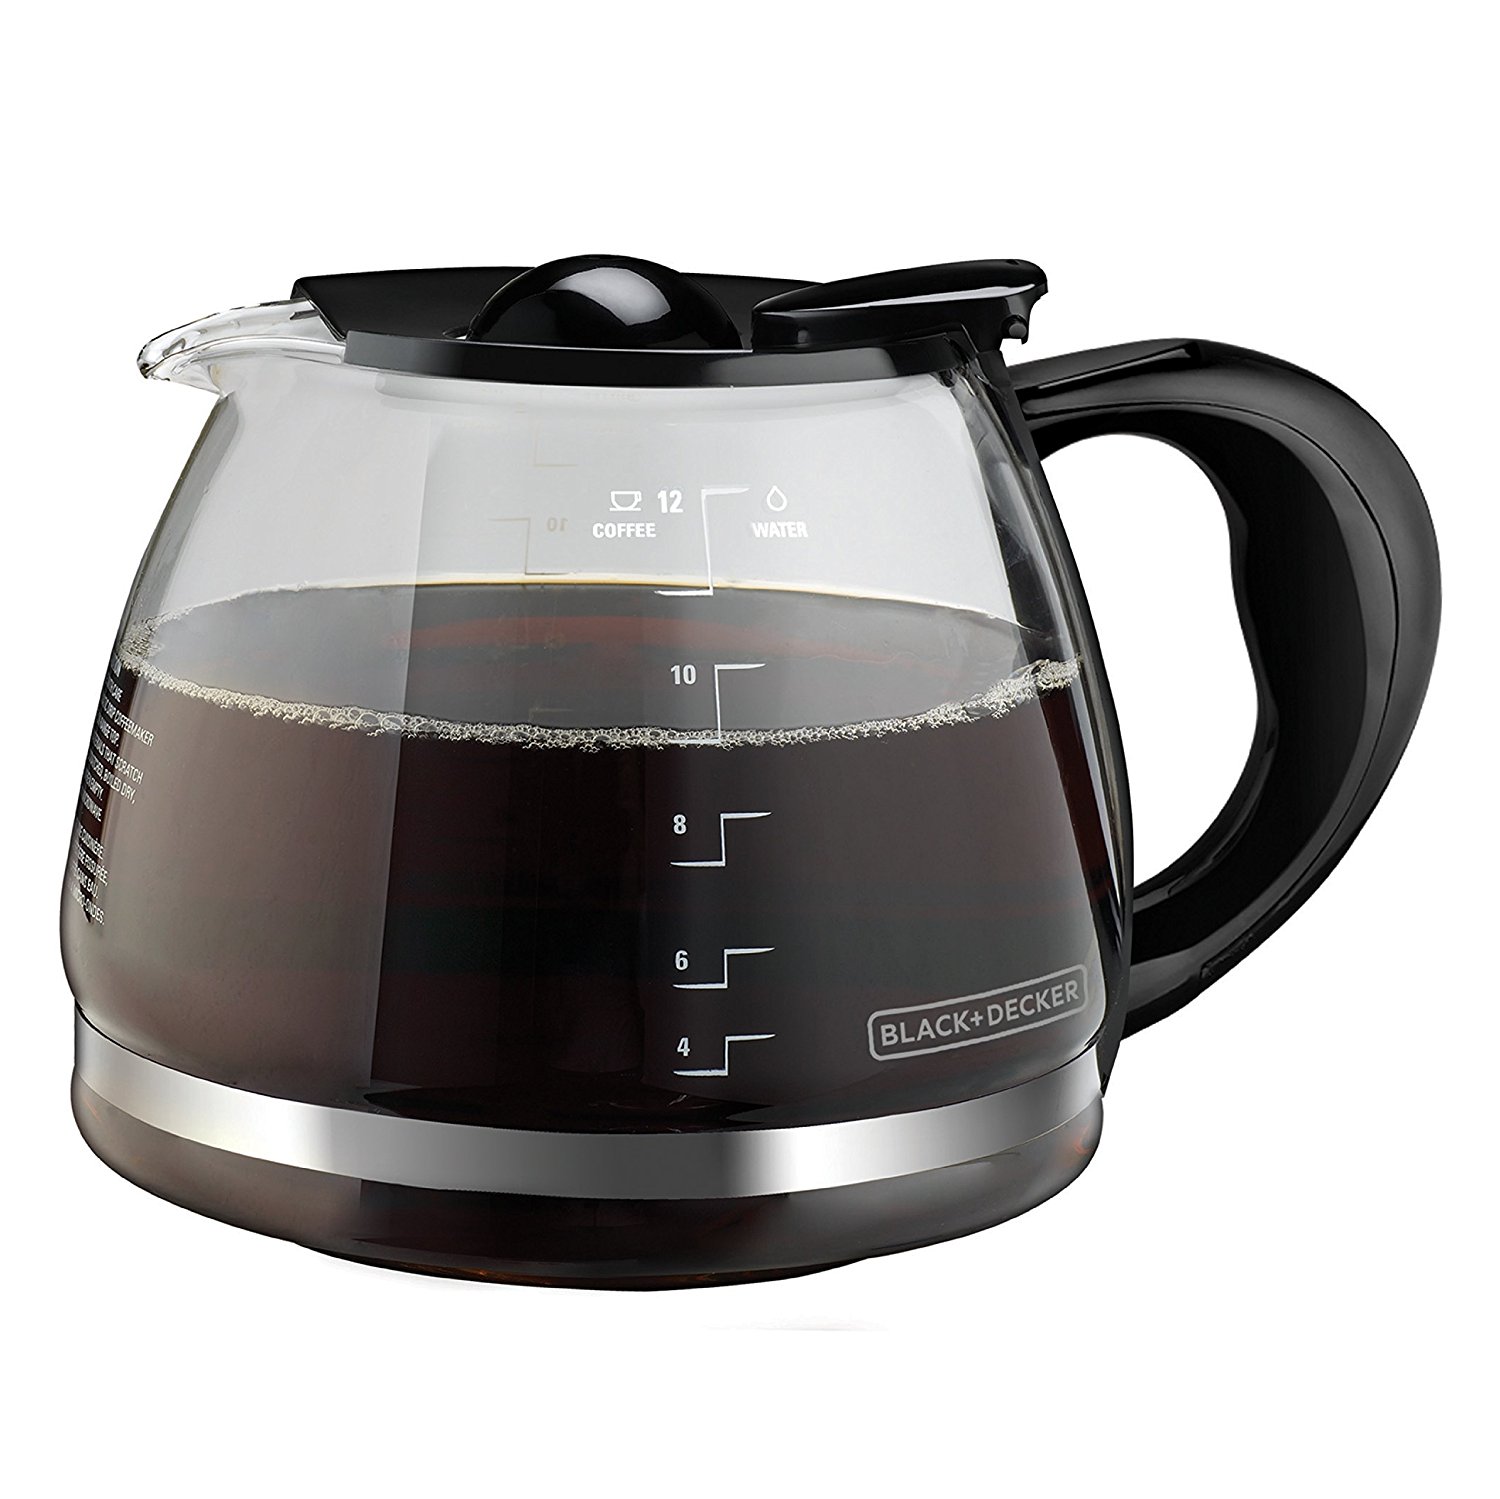 https://buymorecoffee.com/wp-content/uploads/2017/09/BLACKDECKER-12-Cup-Replacement-Carafe2.jpg